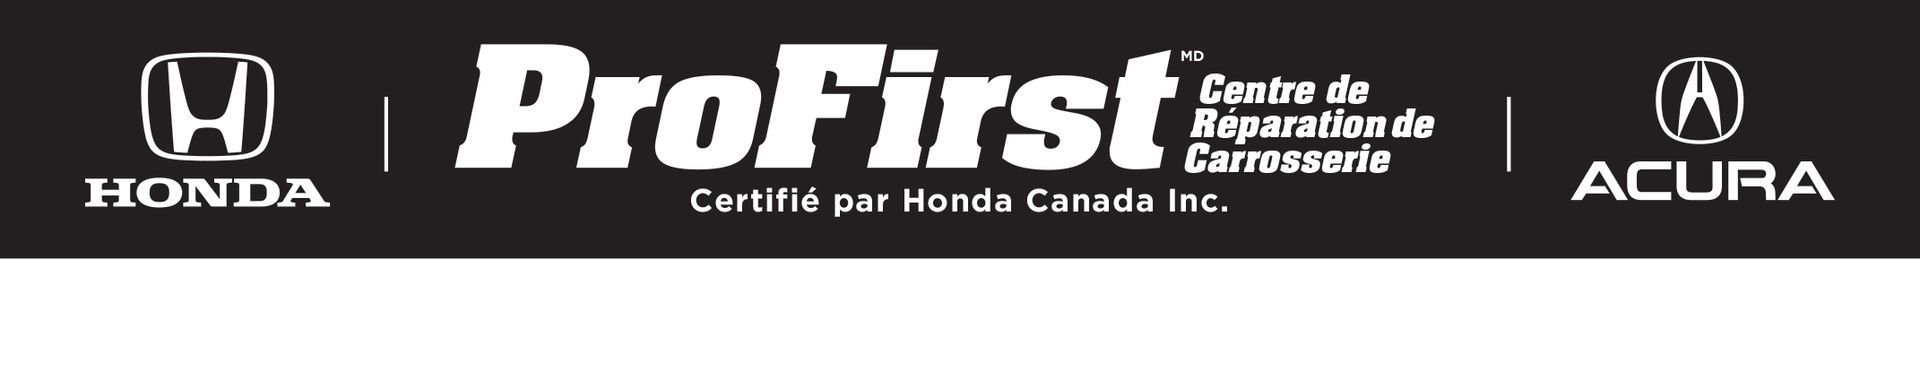 A black and white logo for profirst honda and acura